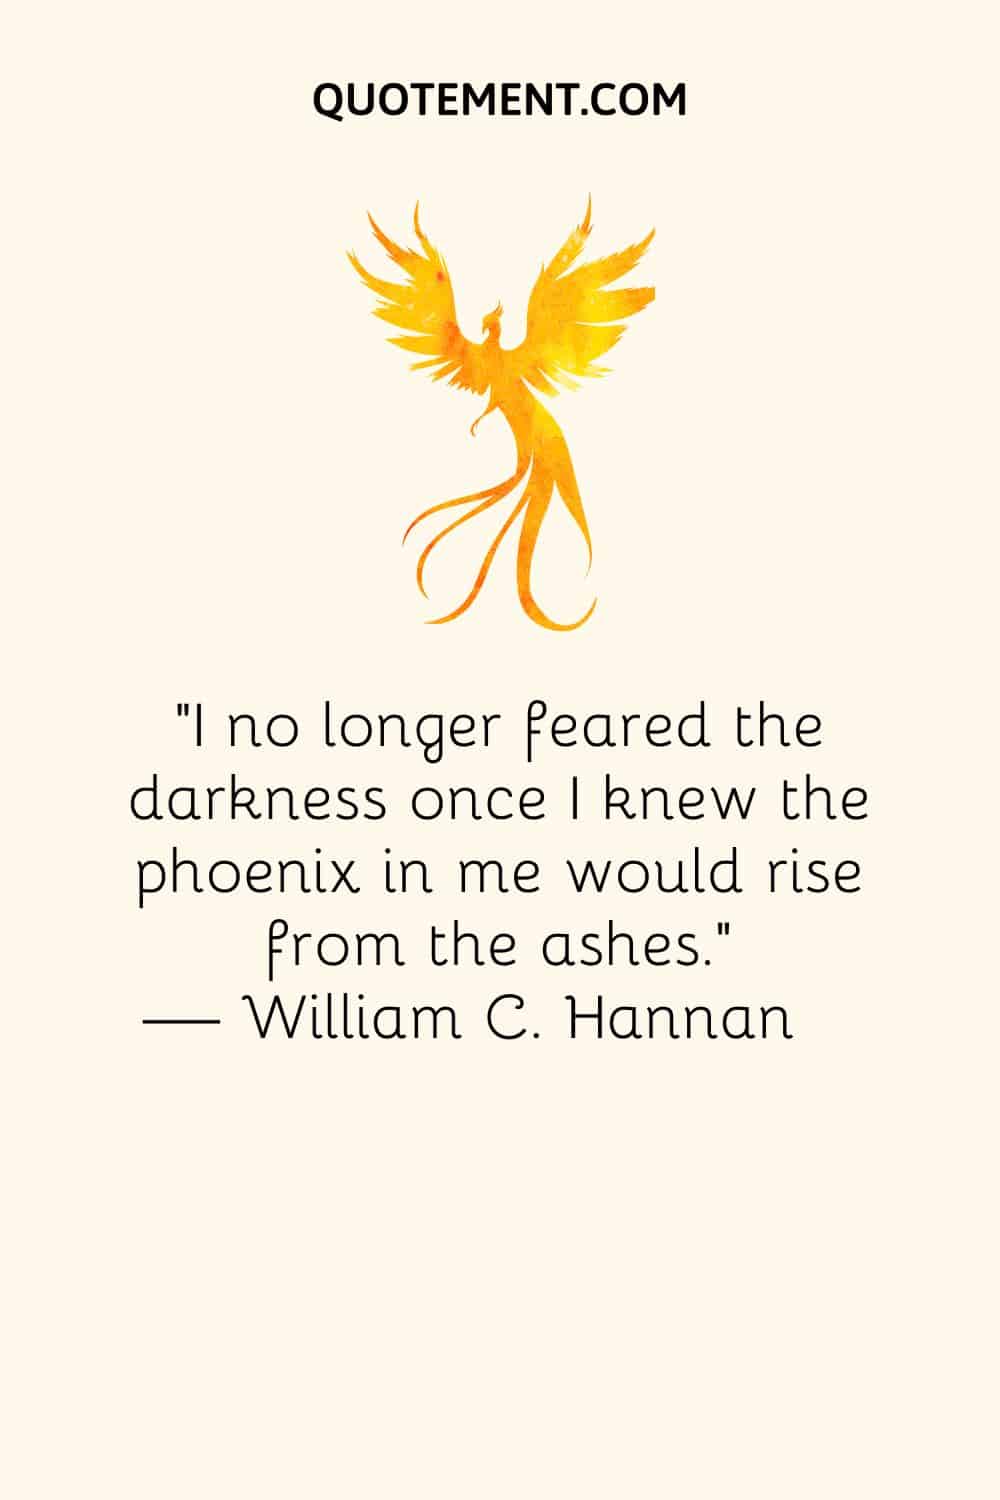 I no longer feared the darkness once I knew the phoenix in me would rise from the ashes